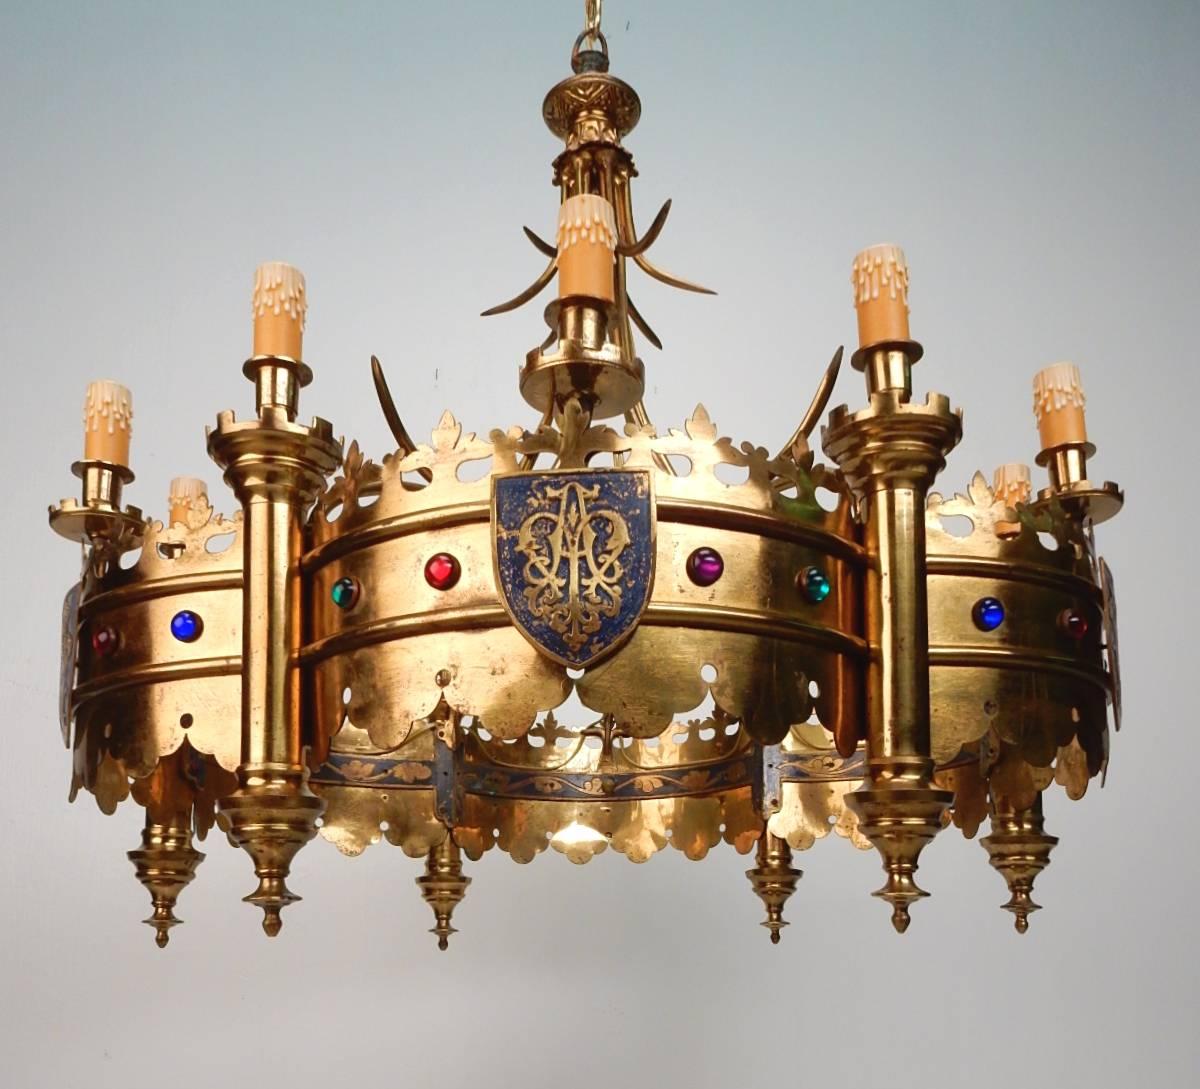 Gothic Early 20th Century Gold Jeweled Crown Electrified Candelabra Chandelier, France